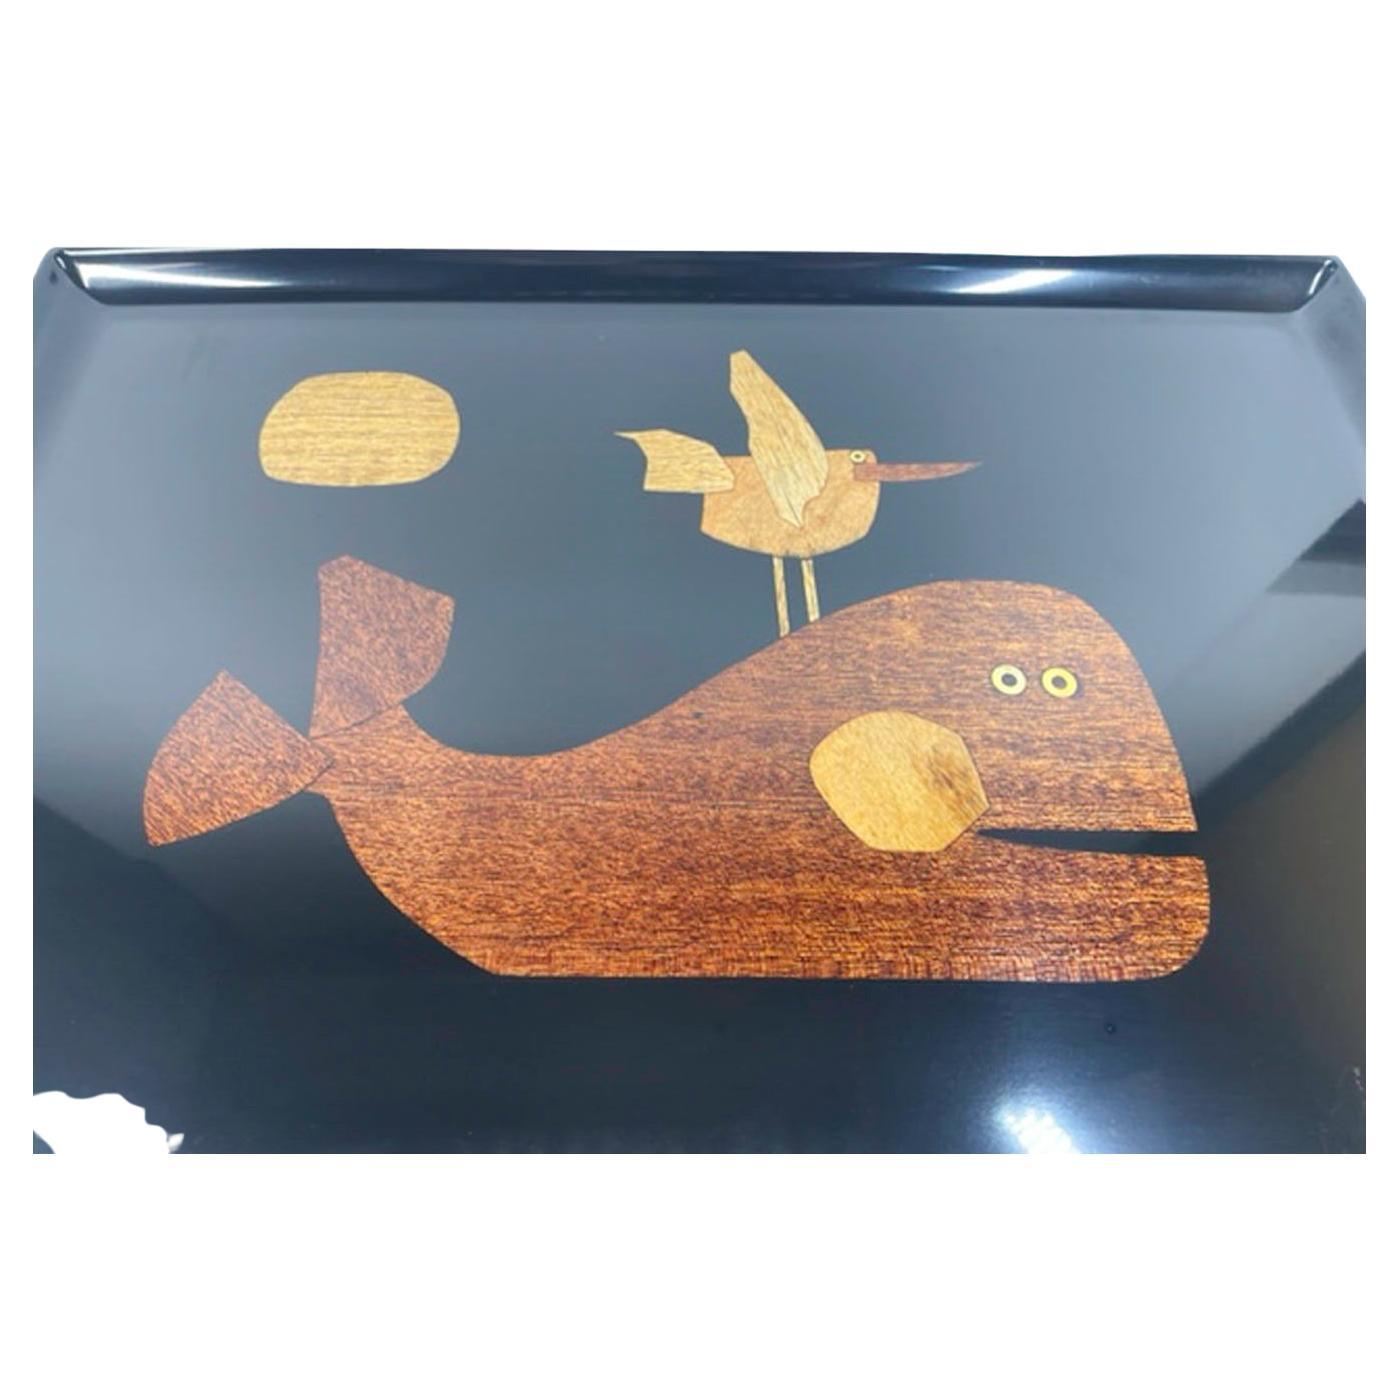 Vintage tray by Couroc of Monterey, made of wood inlaid phenolic resin depicting a whale with a shorebird on its back and with the sun above. Phenolic resin was used for its resistance to damage from cigarette burns, alcohol and boiling water. This